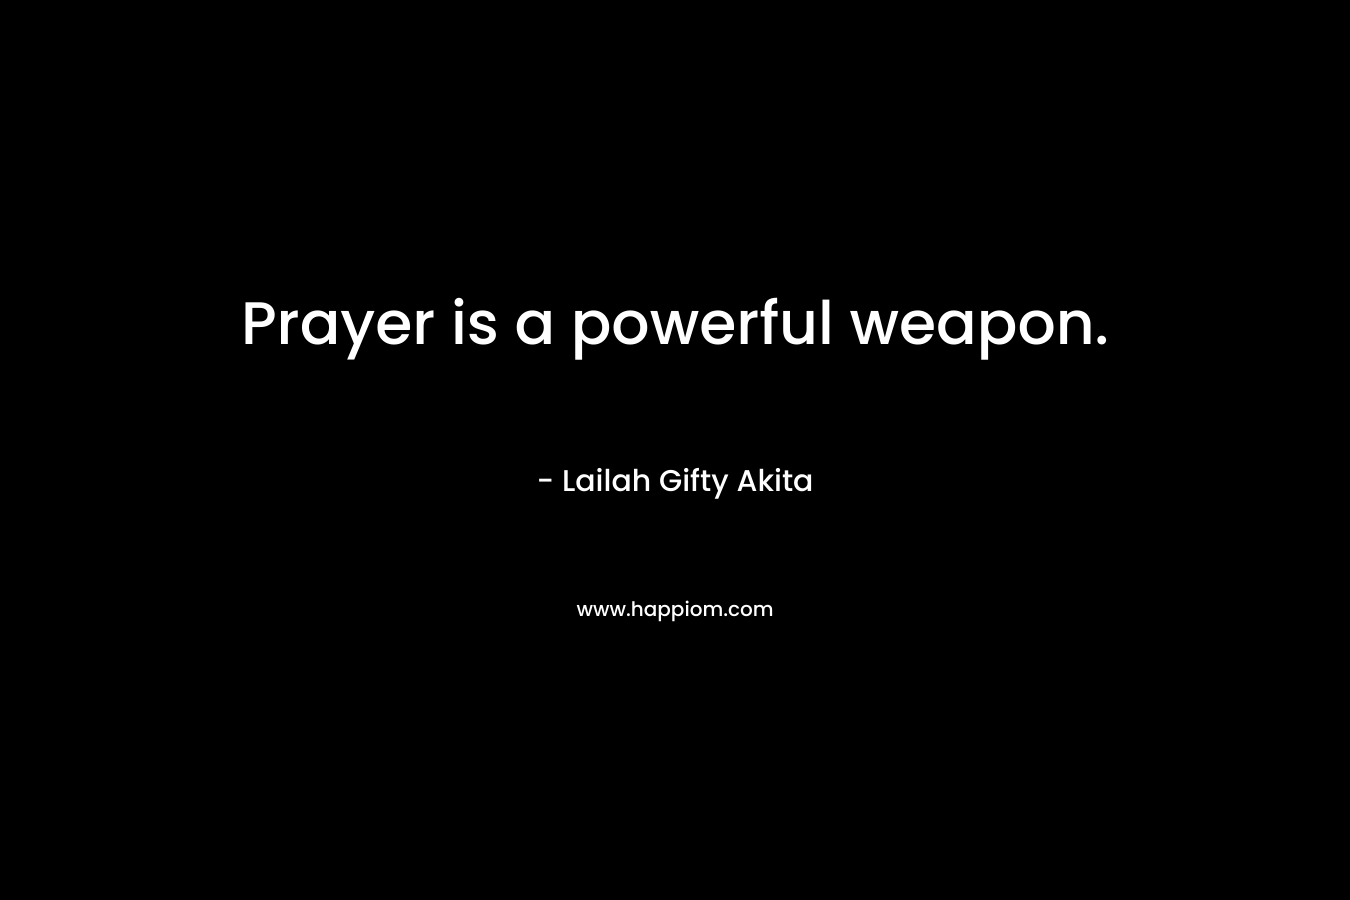 Prayer is a powerful weapon.